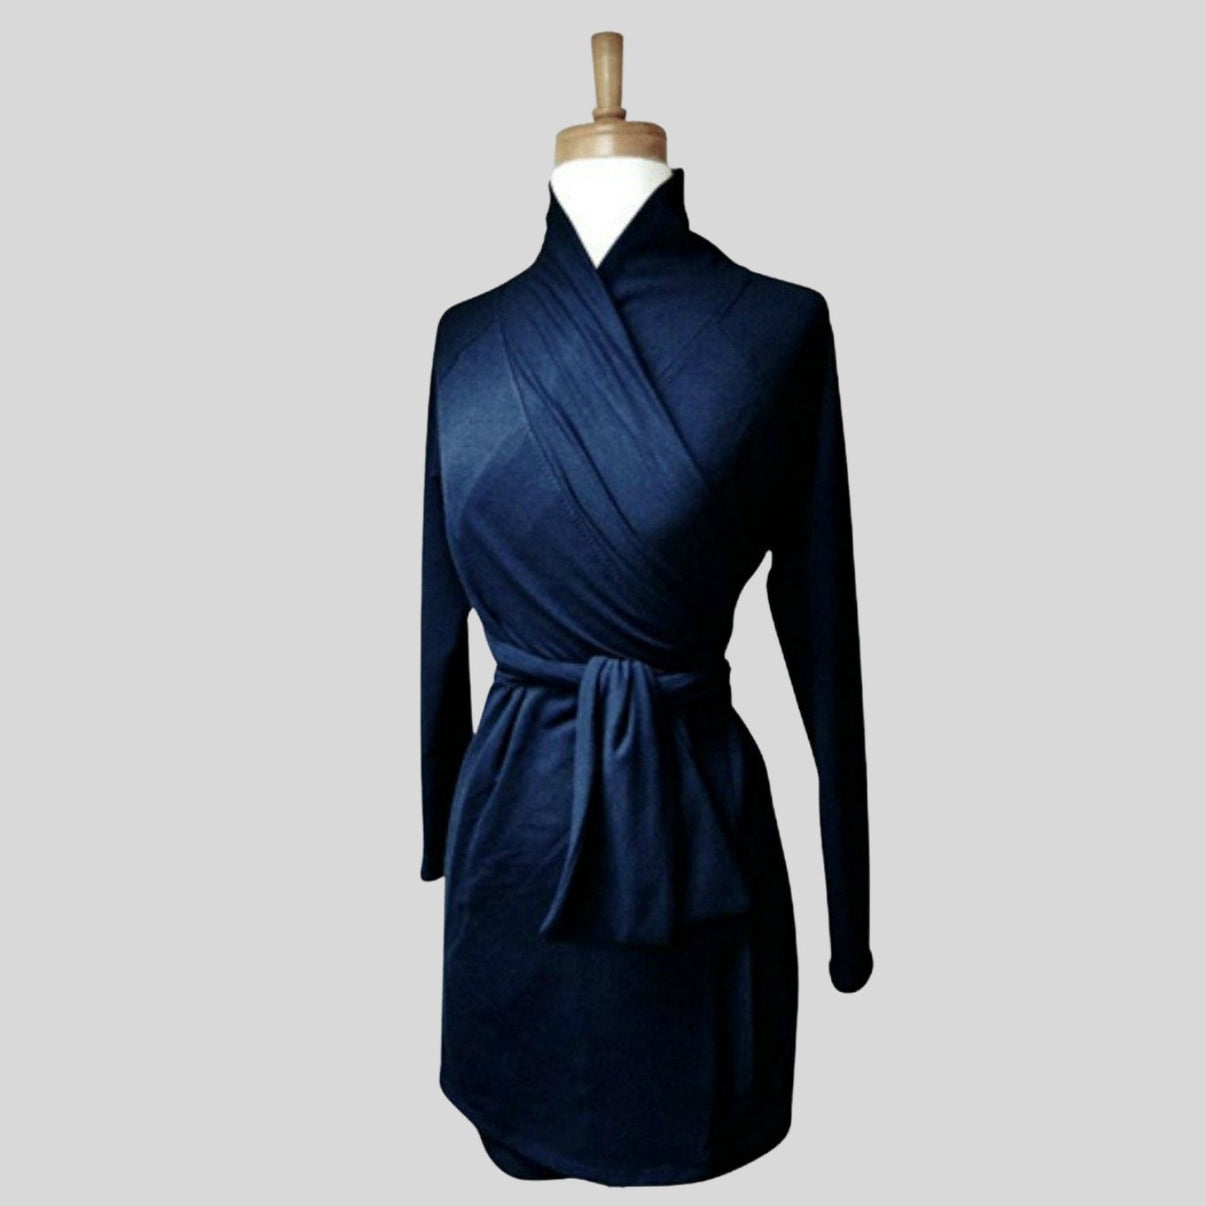 Women's wrap dress with long sleeves | Shop made in Canada dresses ...